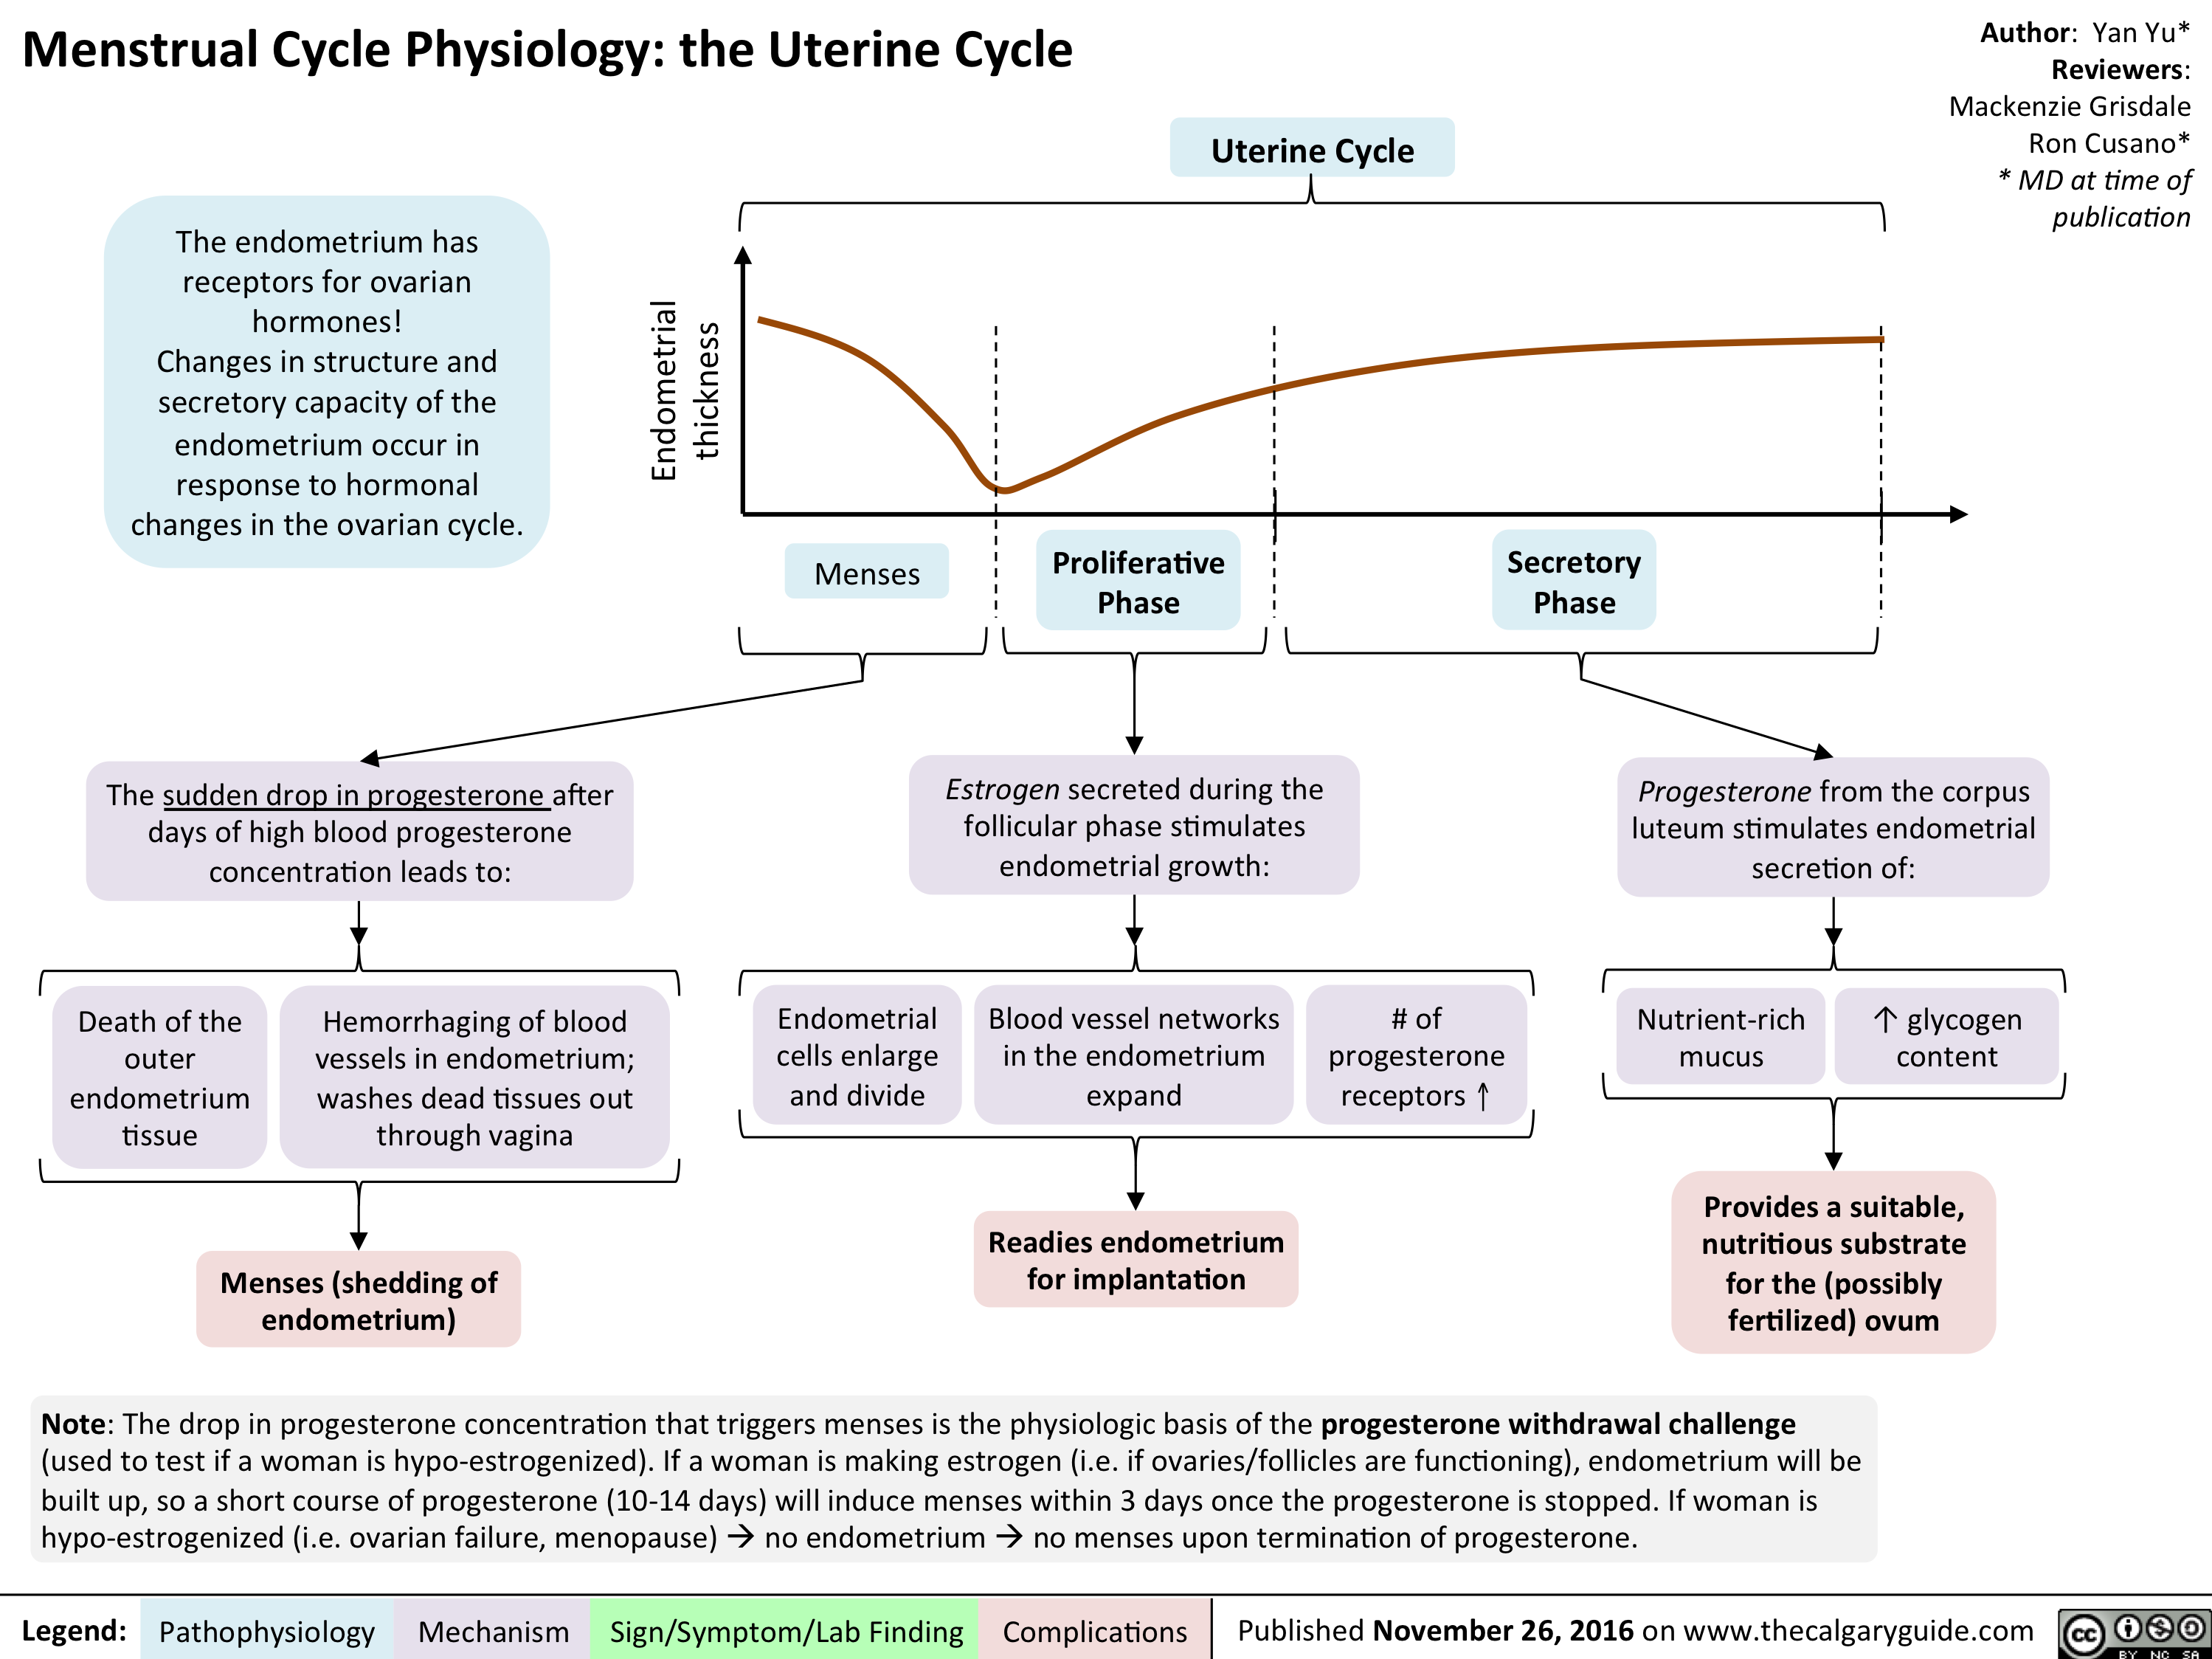 finalized-mg-rc-yy-menstrual-cycle-physiology